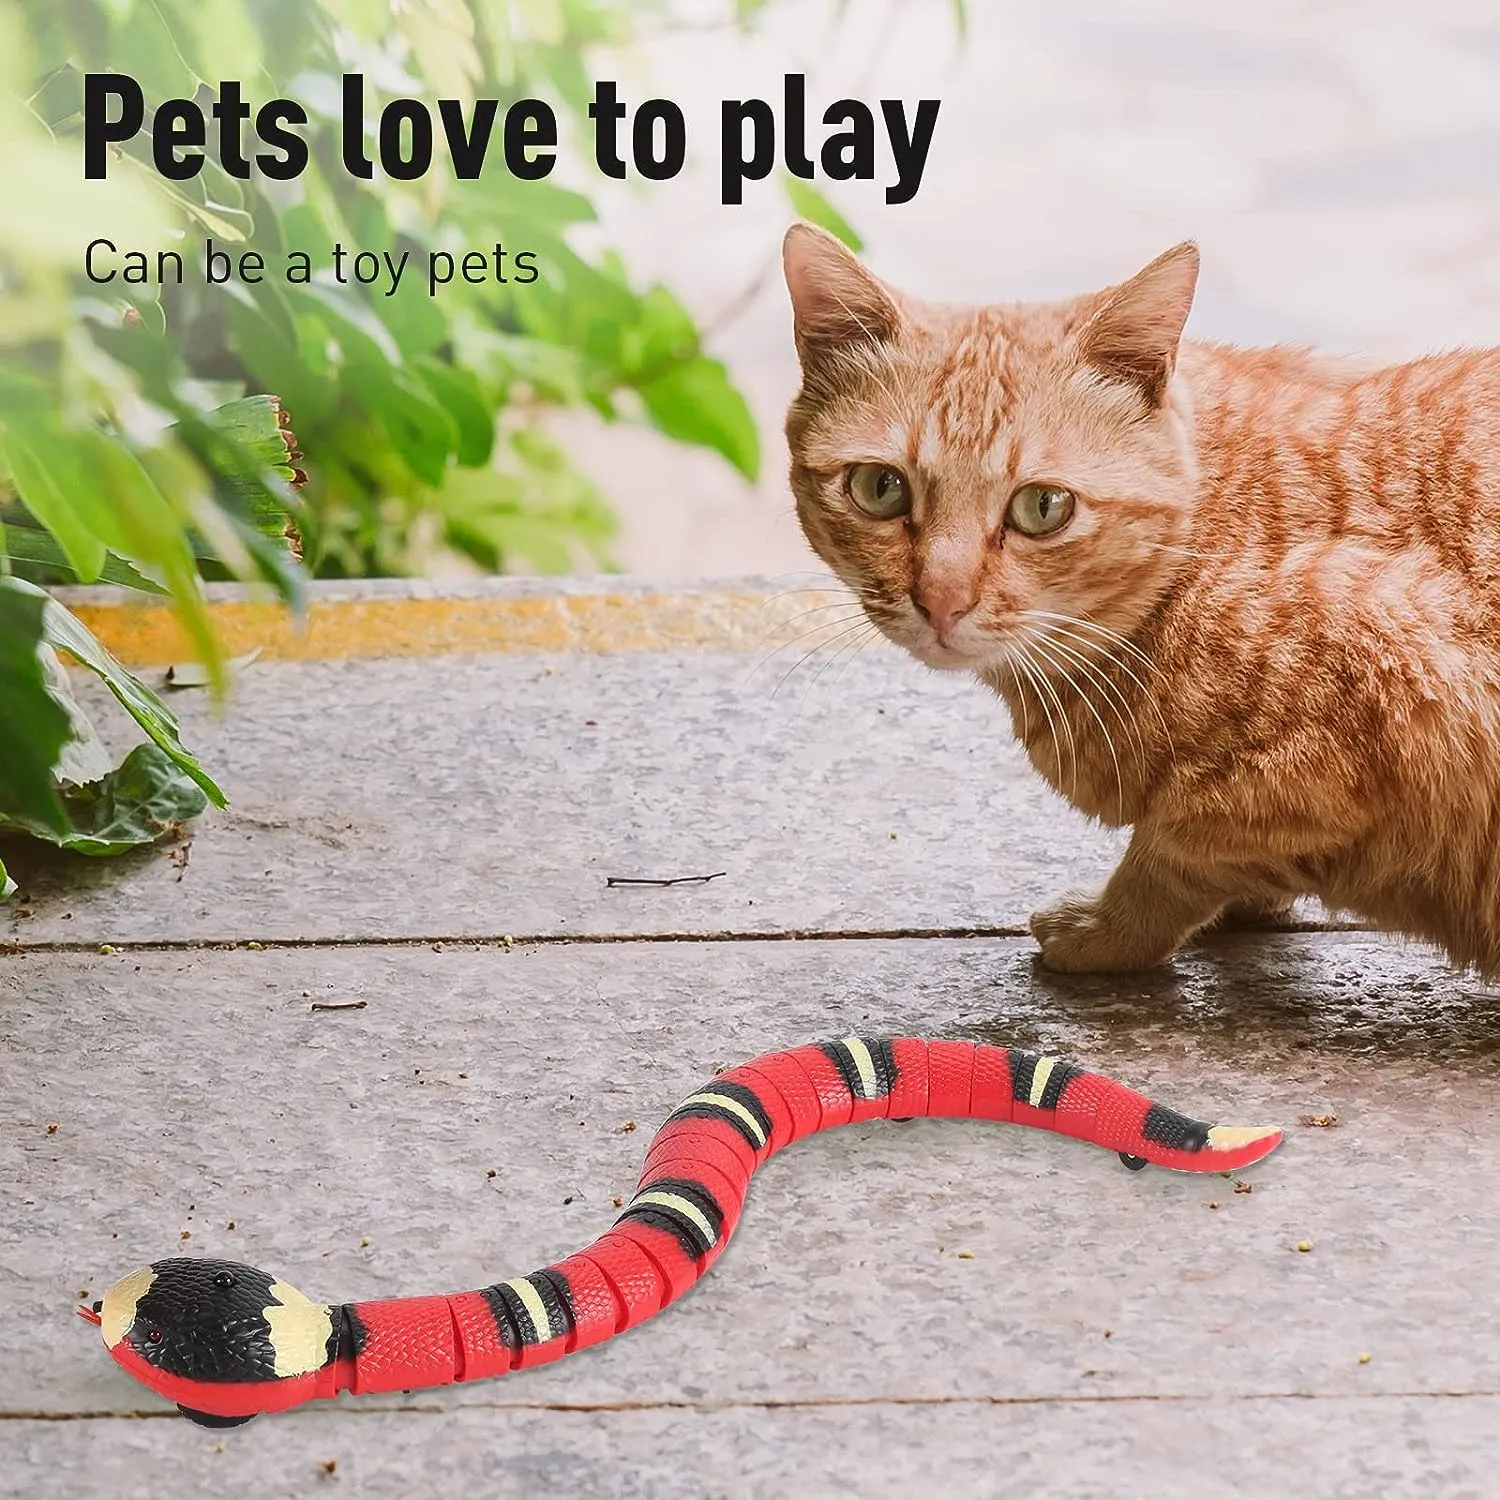 Remote control Snake Interactive Toy Realistic Simulation Smart Sensing Toys Automatically Sense Obstacles and Escape Moving Electric Tricky for Indoor Cats Dogs